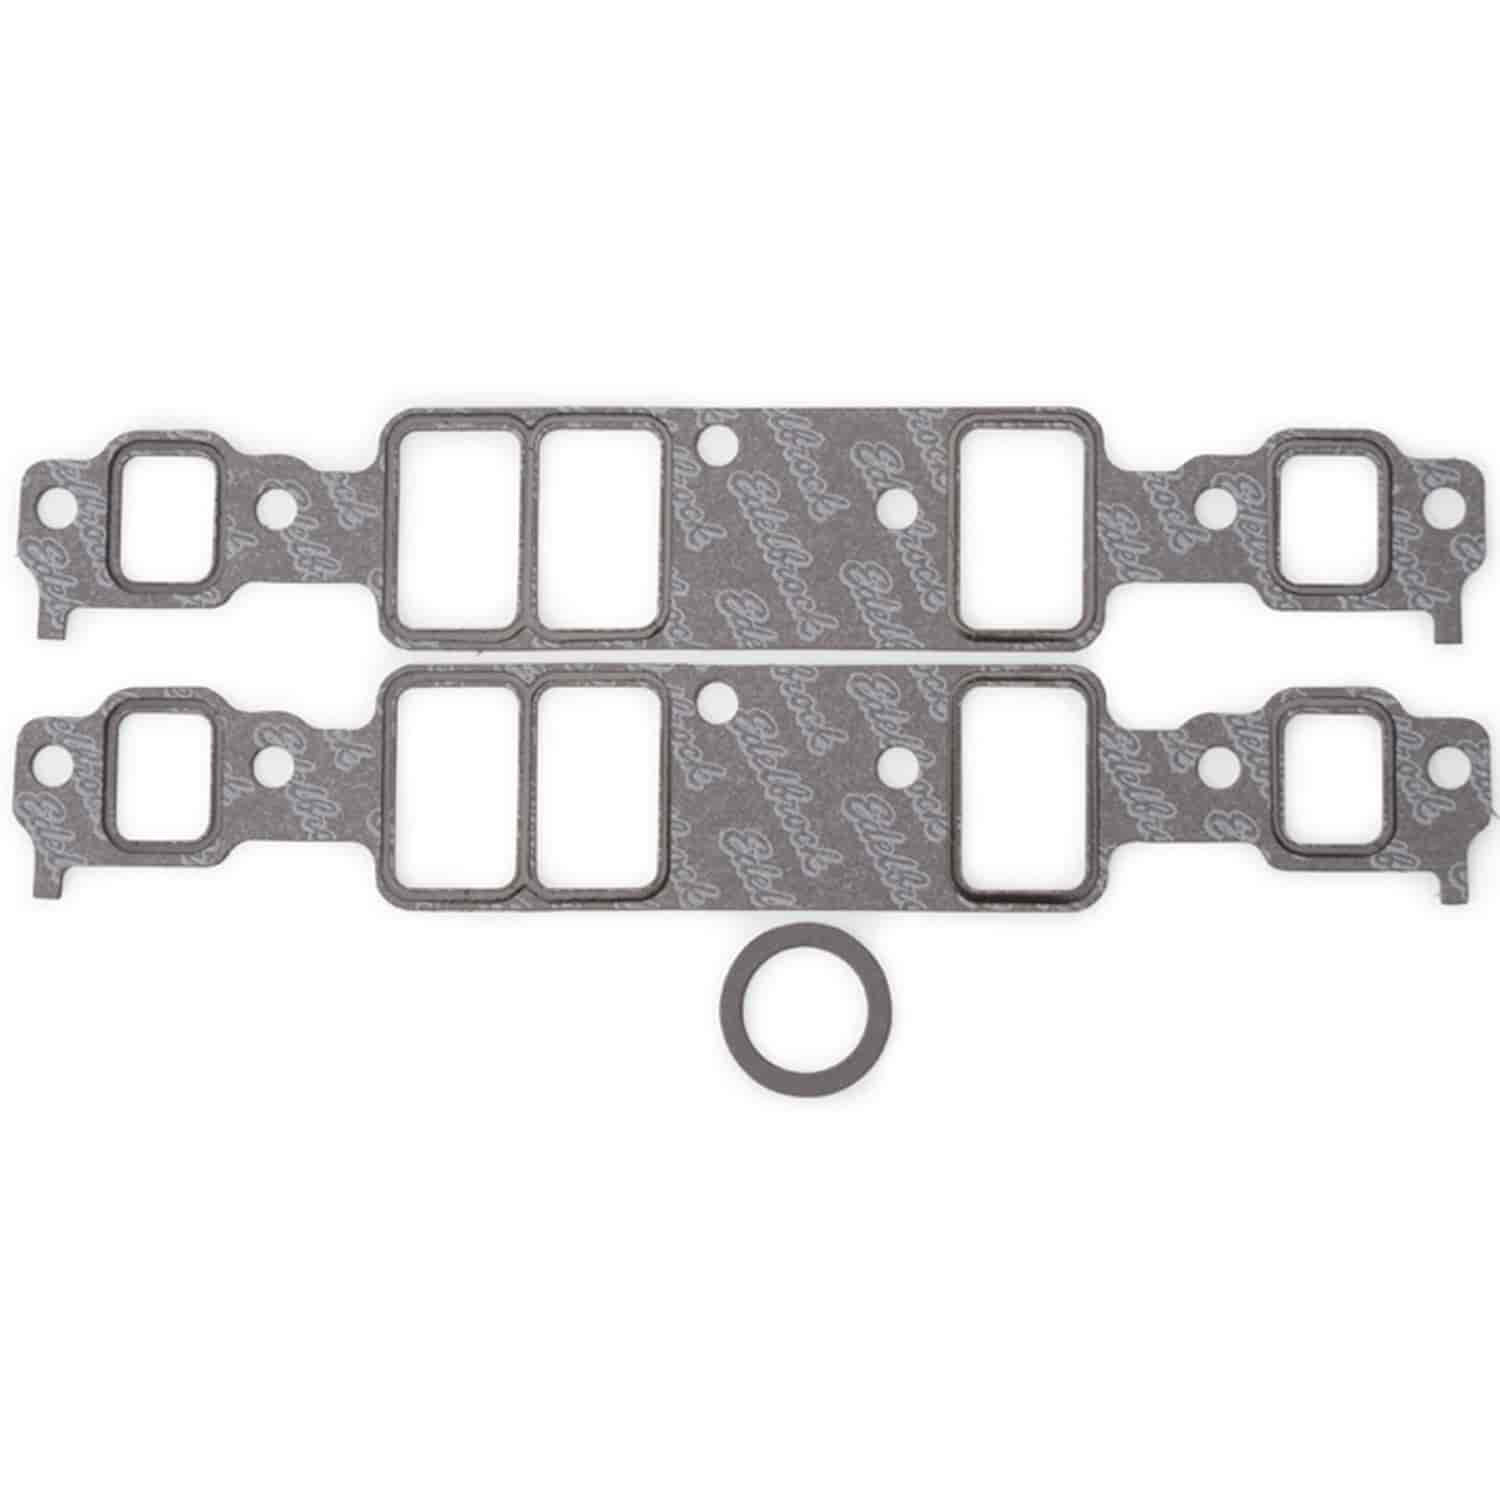 Intake Gaskets for Chevy 90 Degree V6 3.8L/4.3L